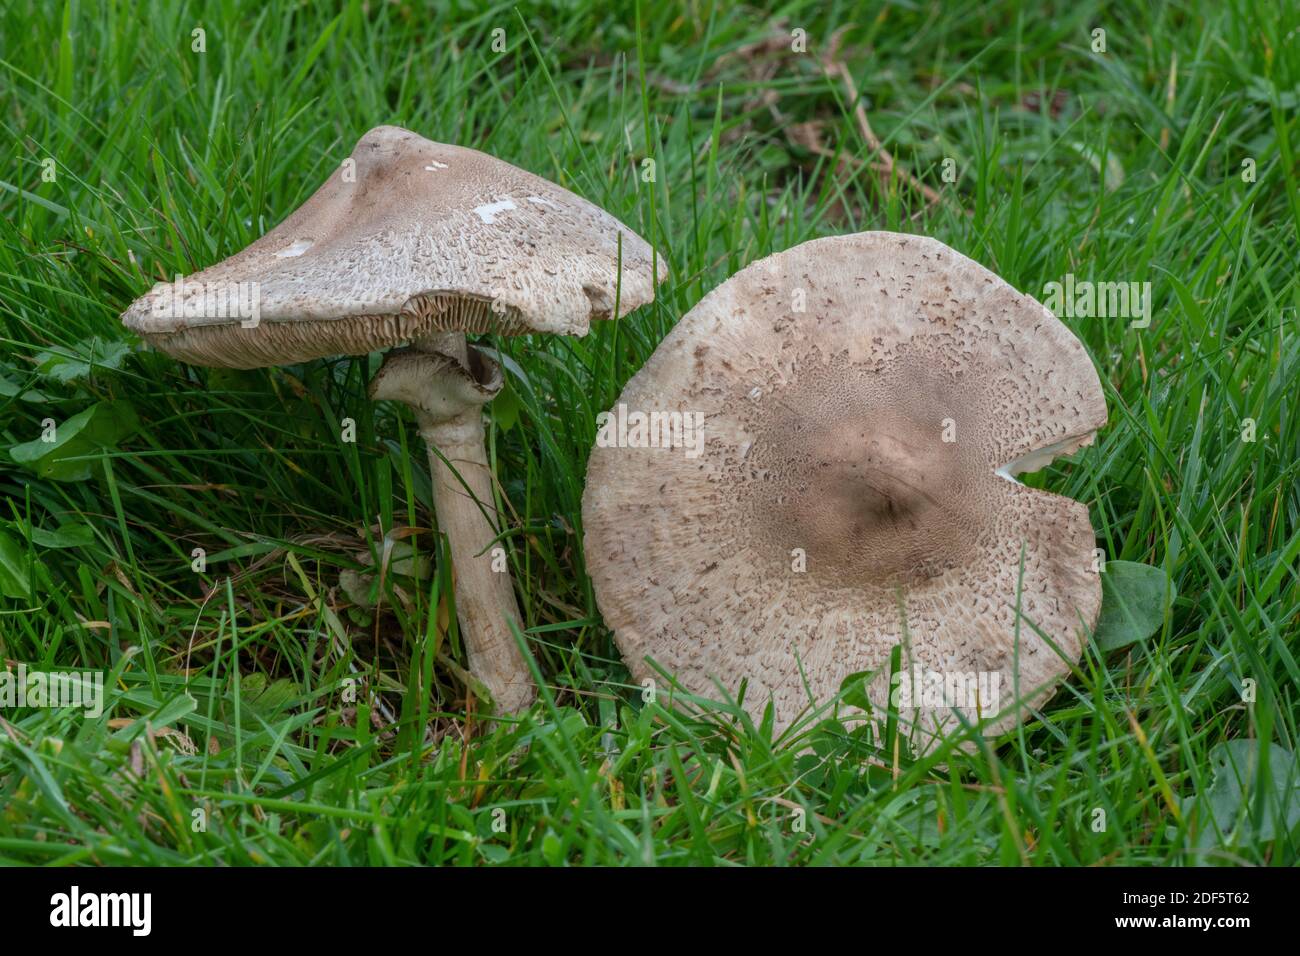 A parasol mushroom, Macrolepiota excoriata, growing in unimproved old meadow, Dorset. Stock Photo